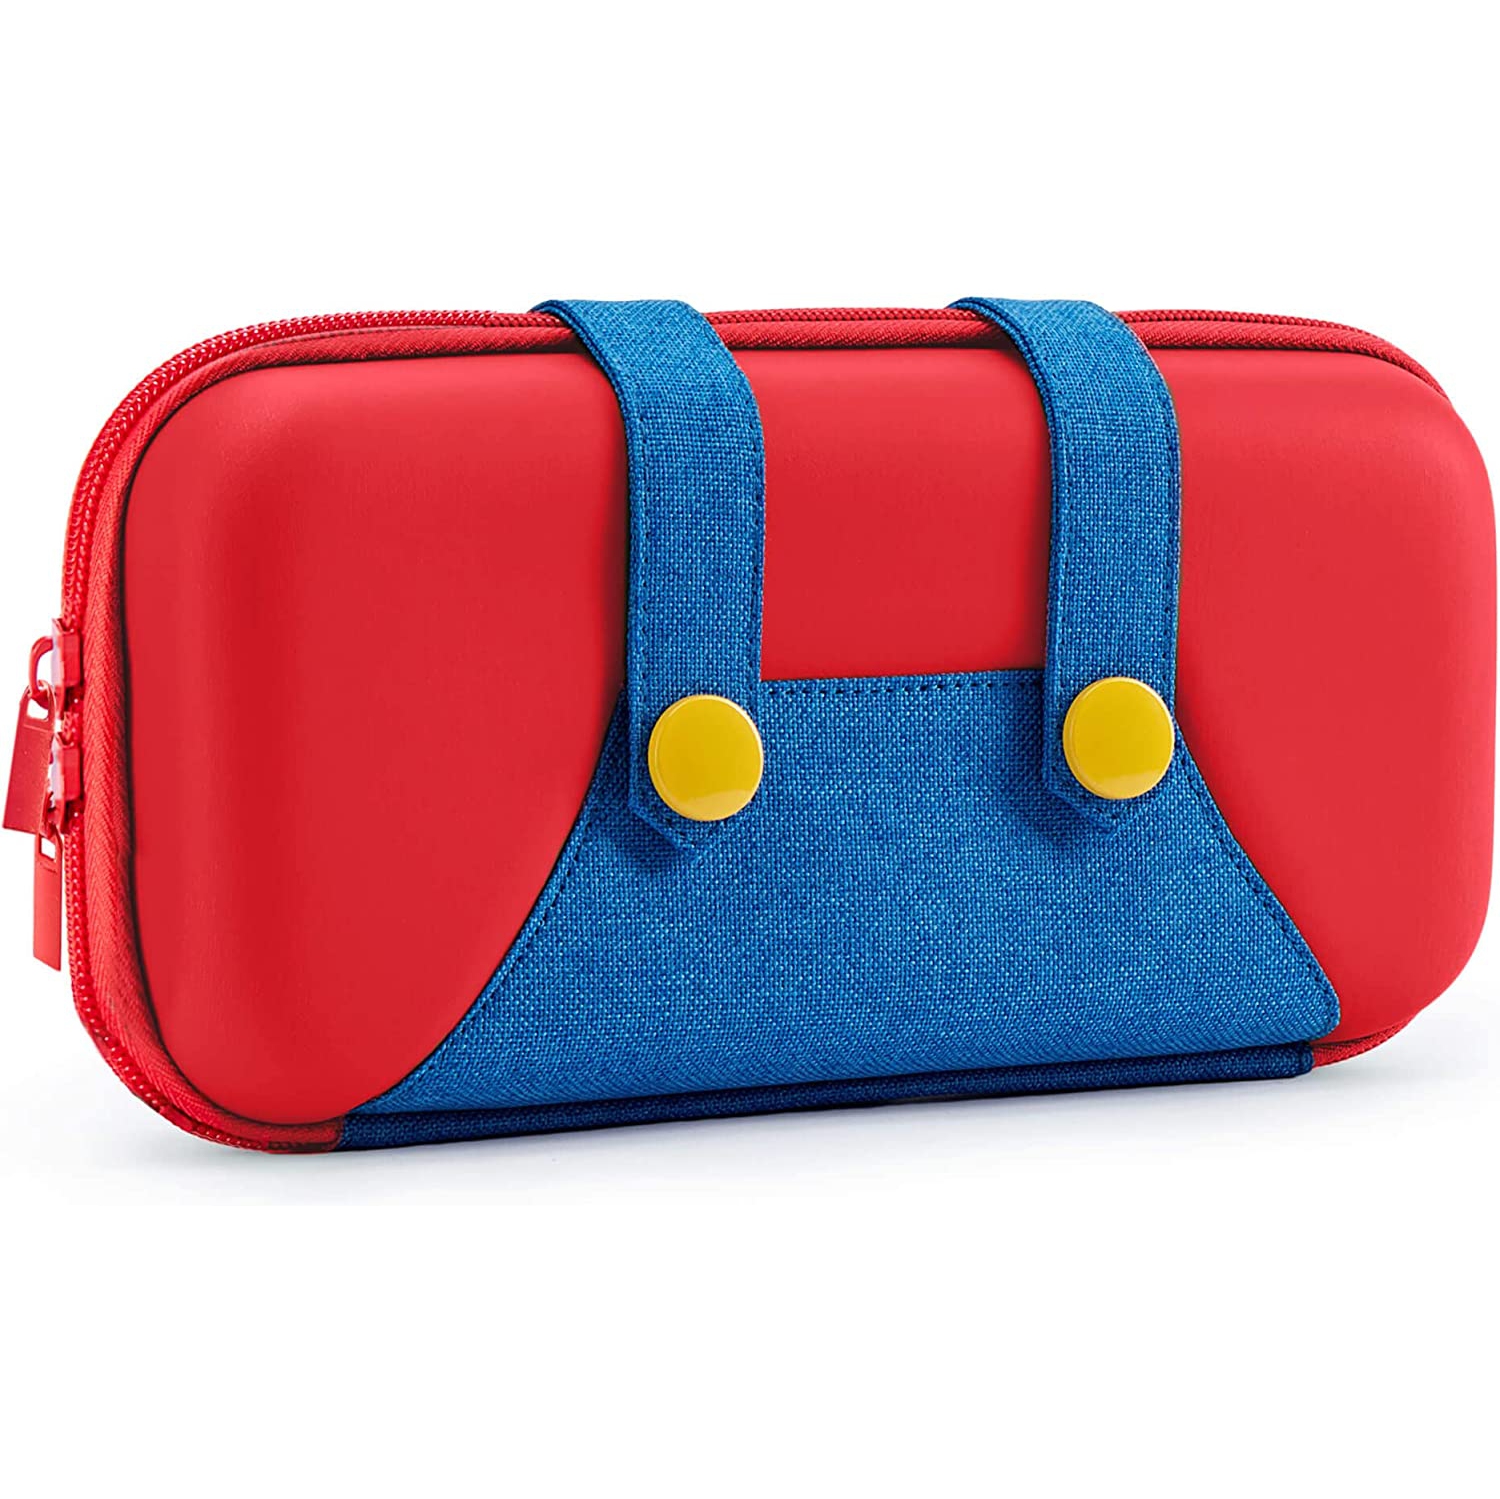 Switch Case Compatible with Nintendo Switch/OLED, Cute Portable Switch Carrying Case with 10 Game Holders for Mario Fans - Red